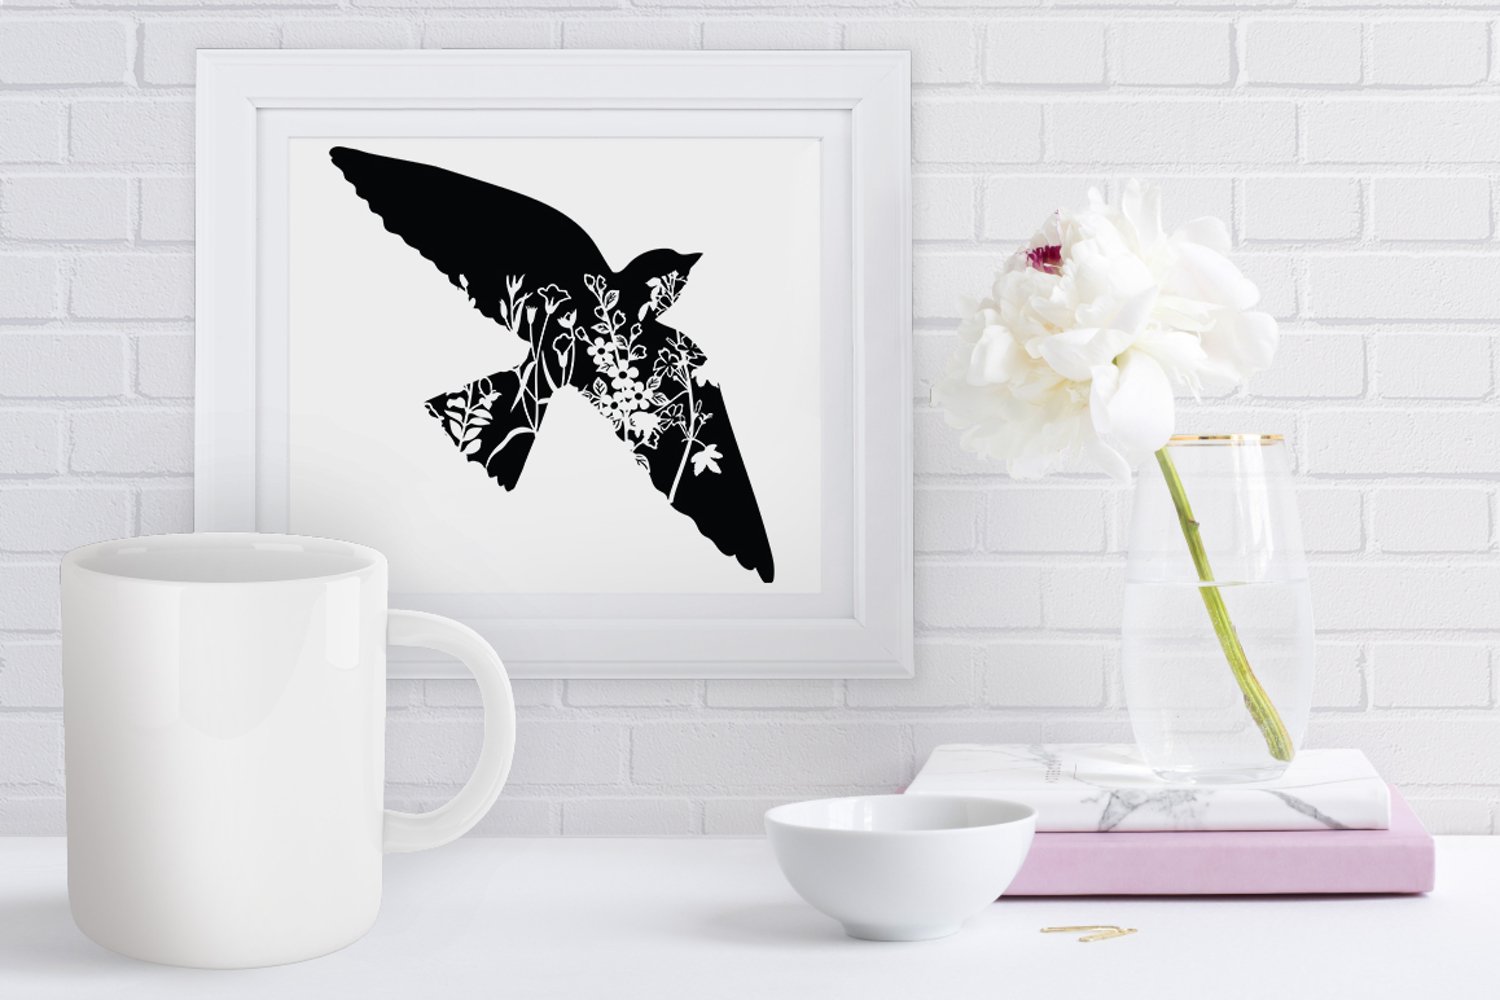 Picture of a bird on a wall next to a vase with flowers.